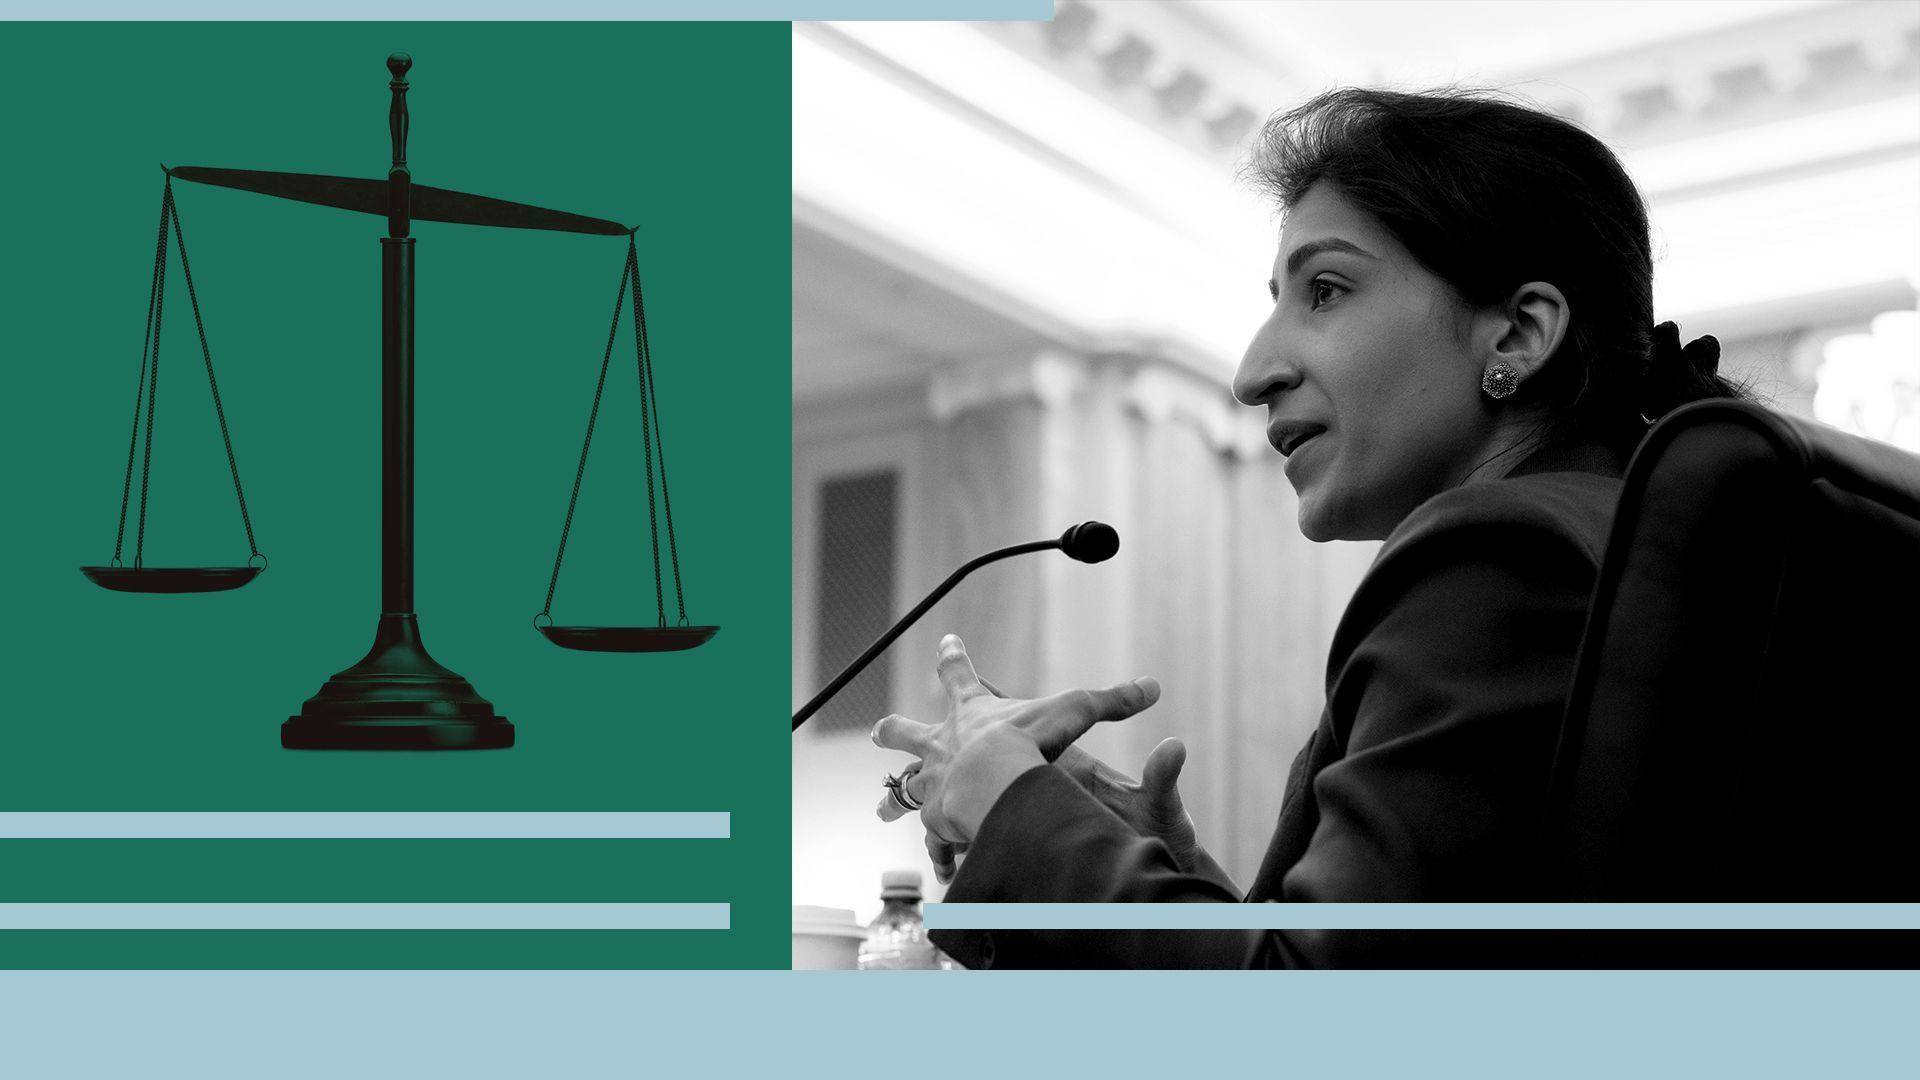 A photo illustration of FTC chair Lina Khan and scales of justice